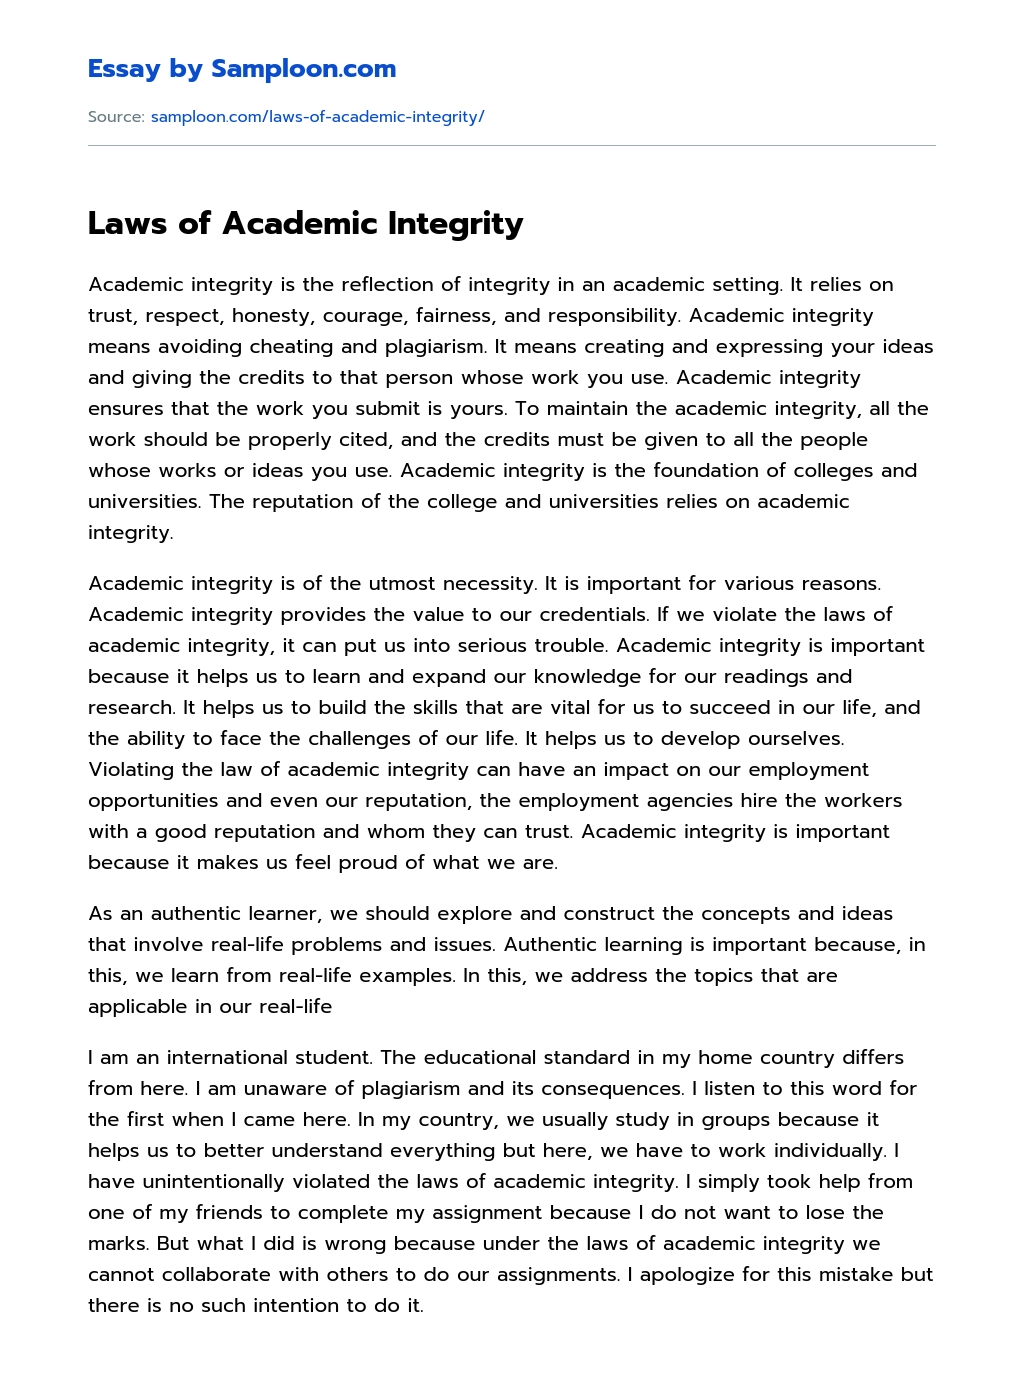 Laws of Academic Integrity essay